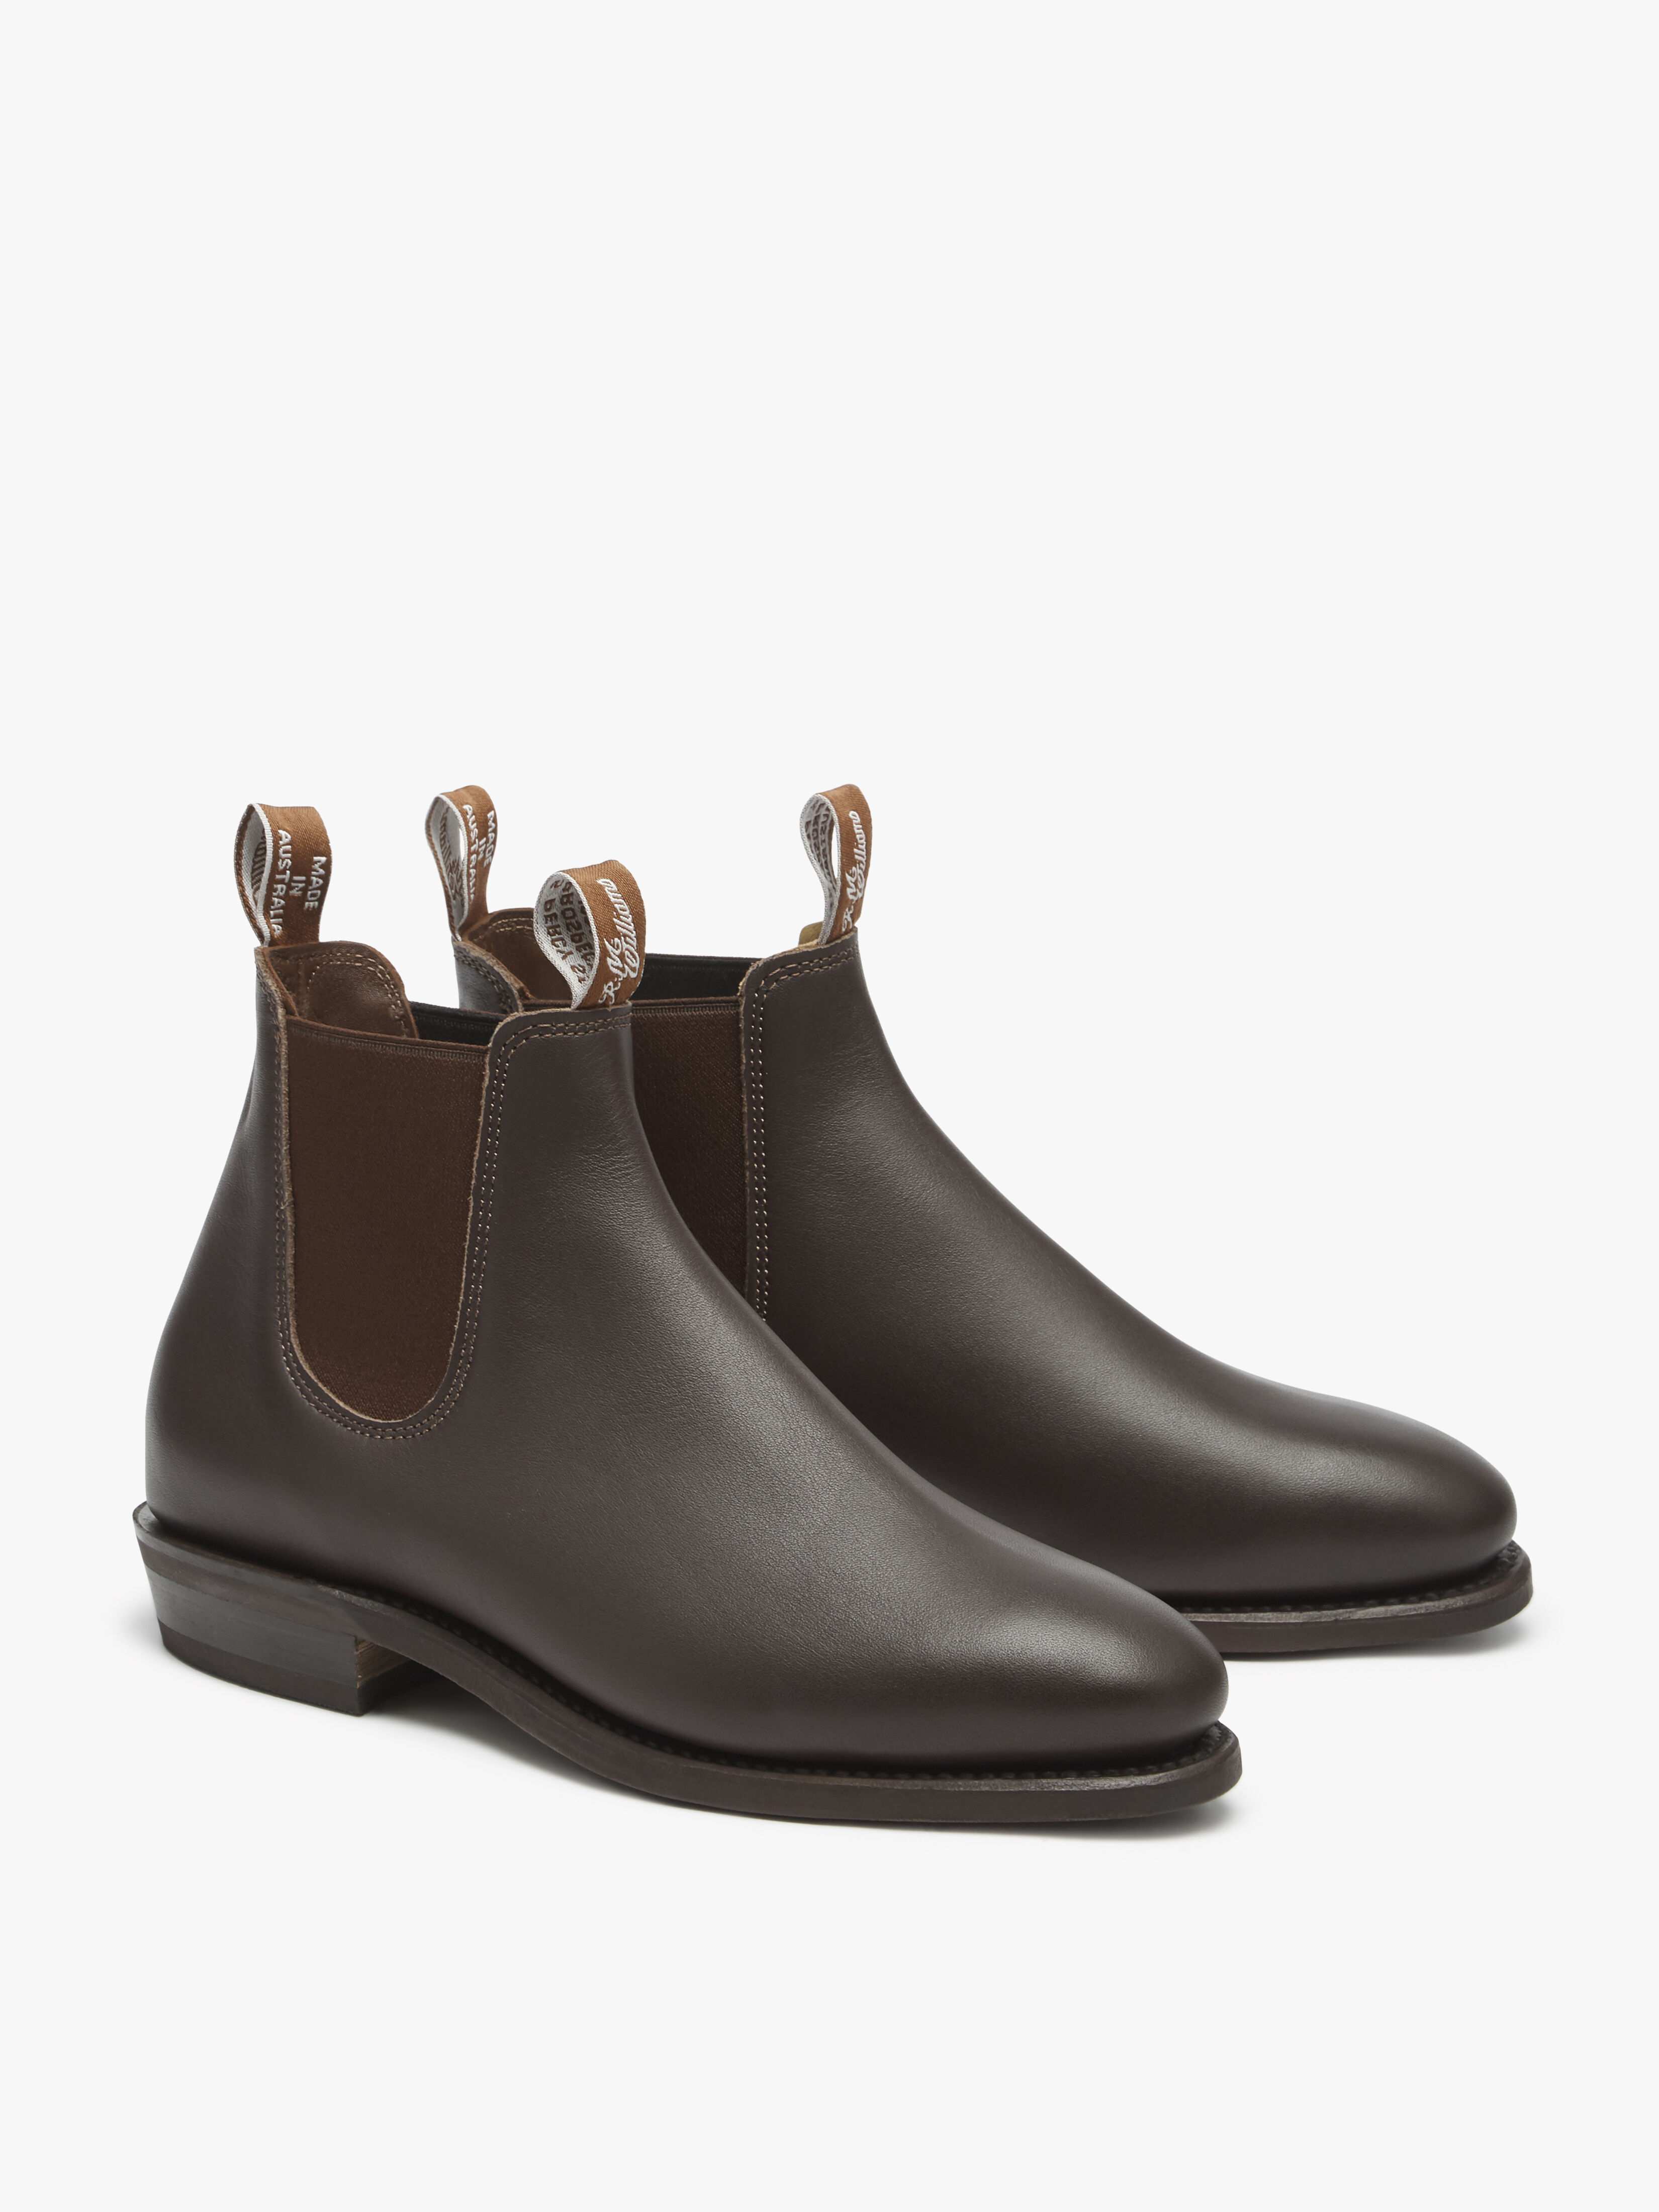 rm williams chelsea boots sale